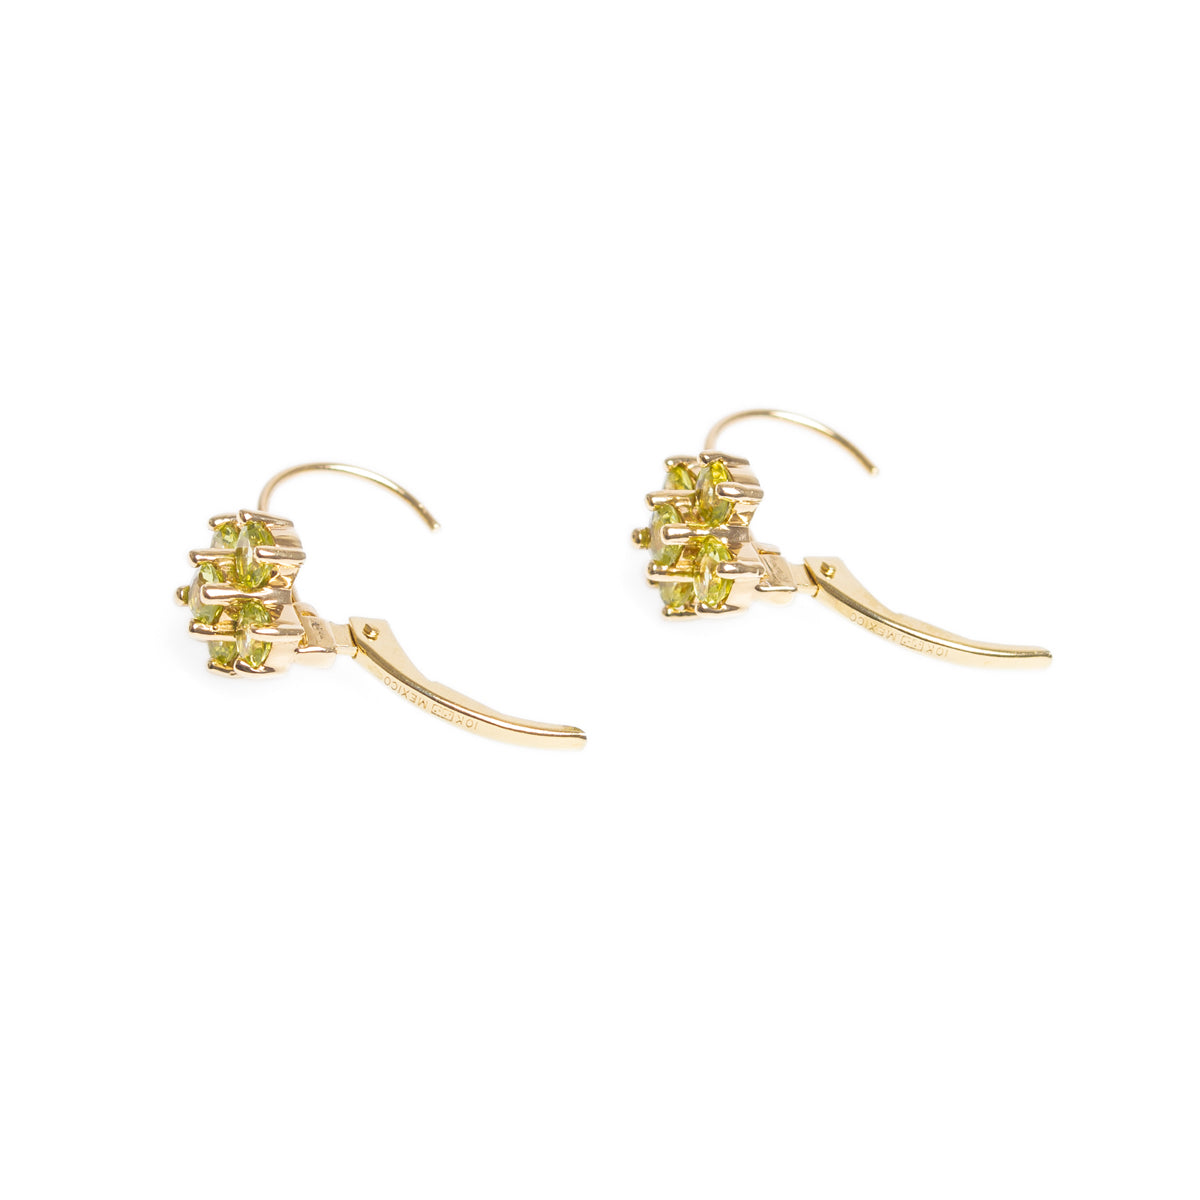 Pair 10ct Gold Mexico Domino/Dice Logo Earrings With Peridot Gemstones For Pierced Ears  (Code A978)